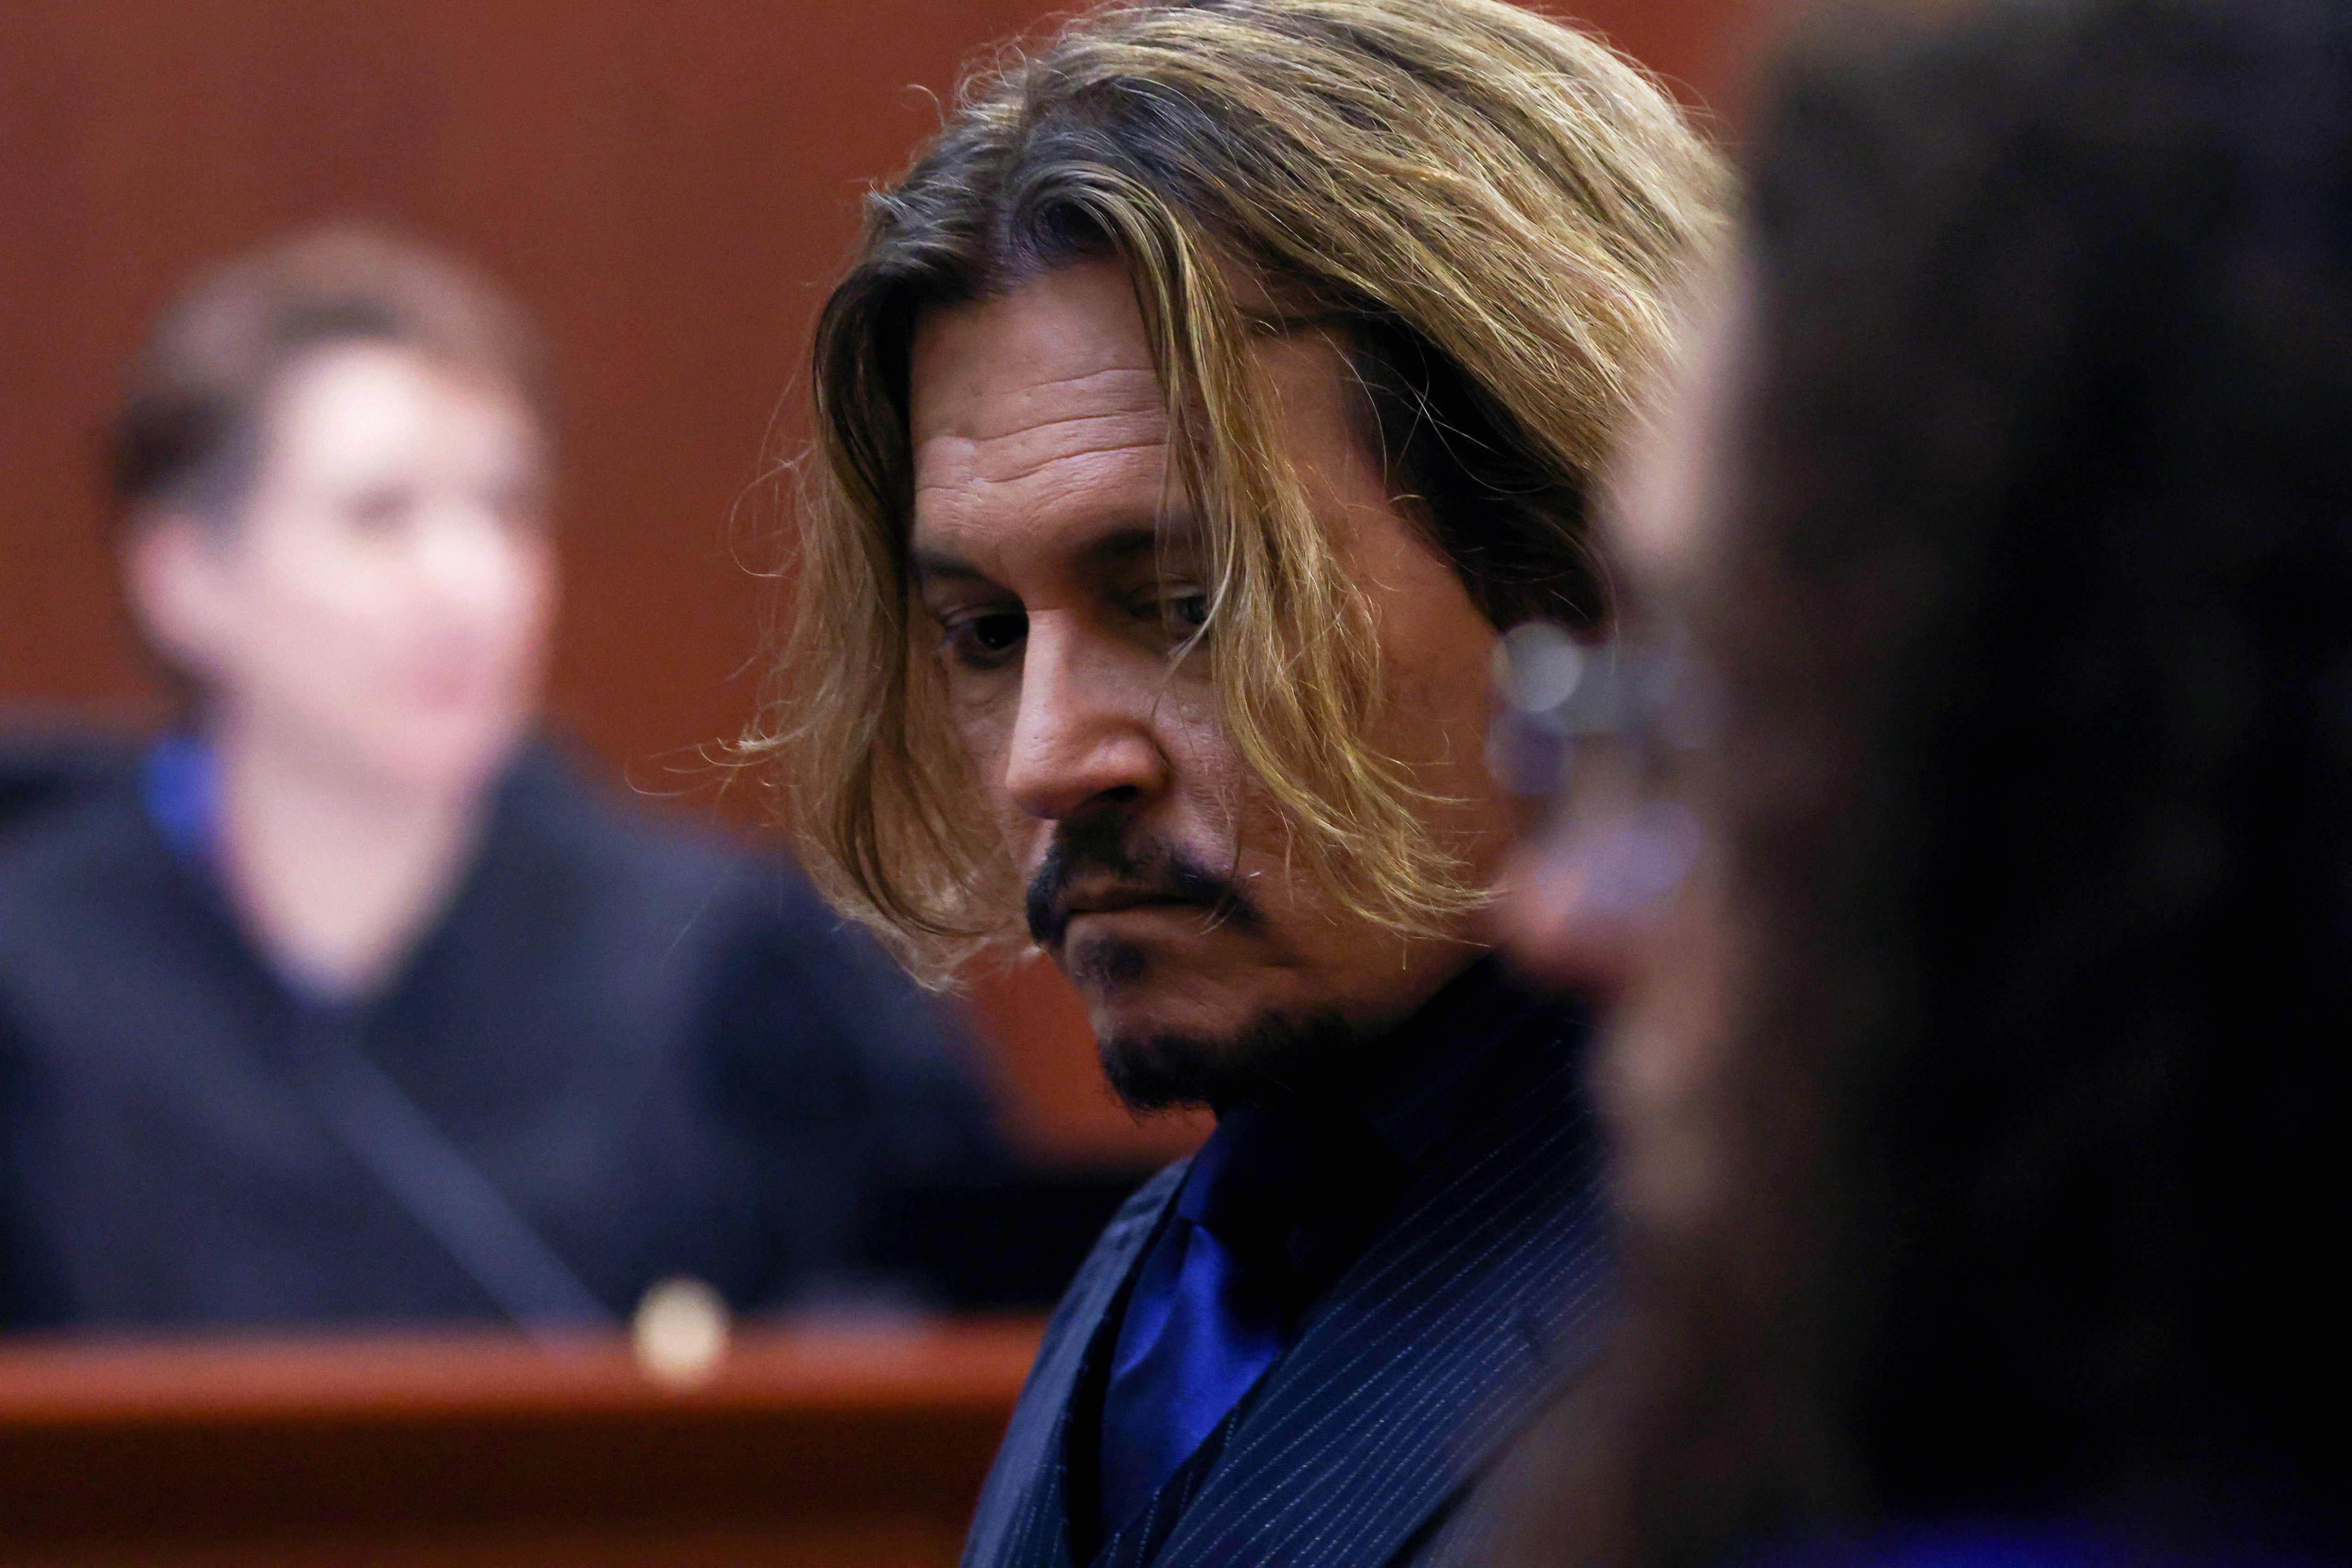 Depp sits in court on 13 April